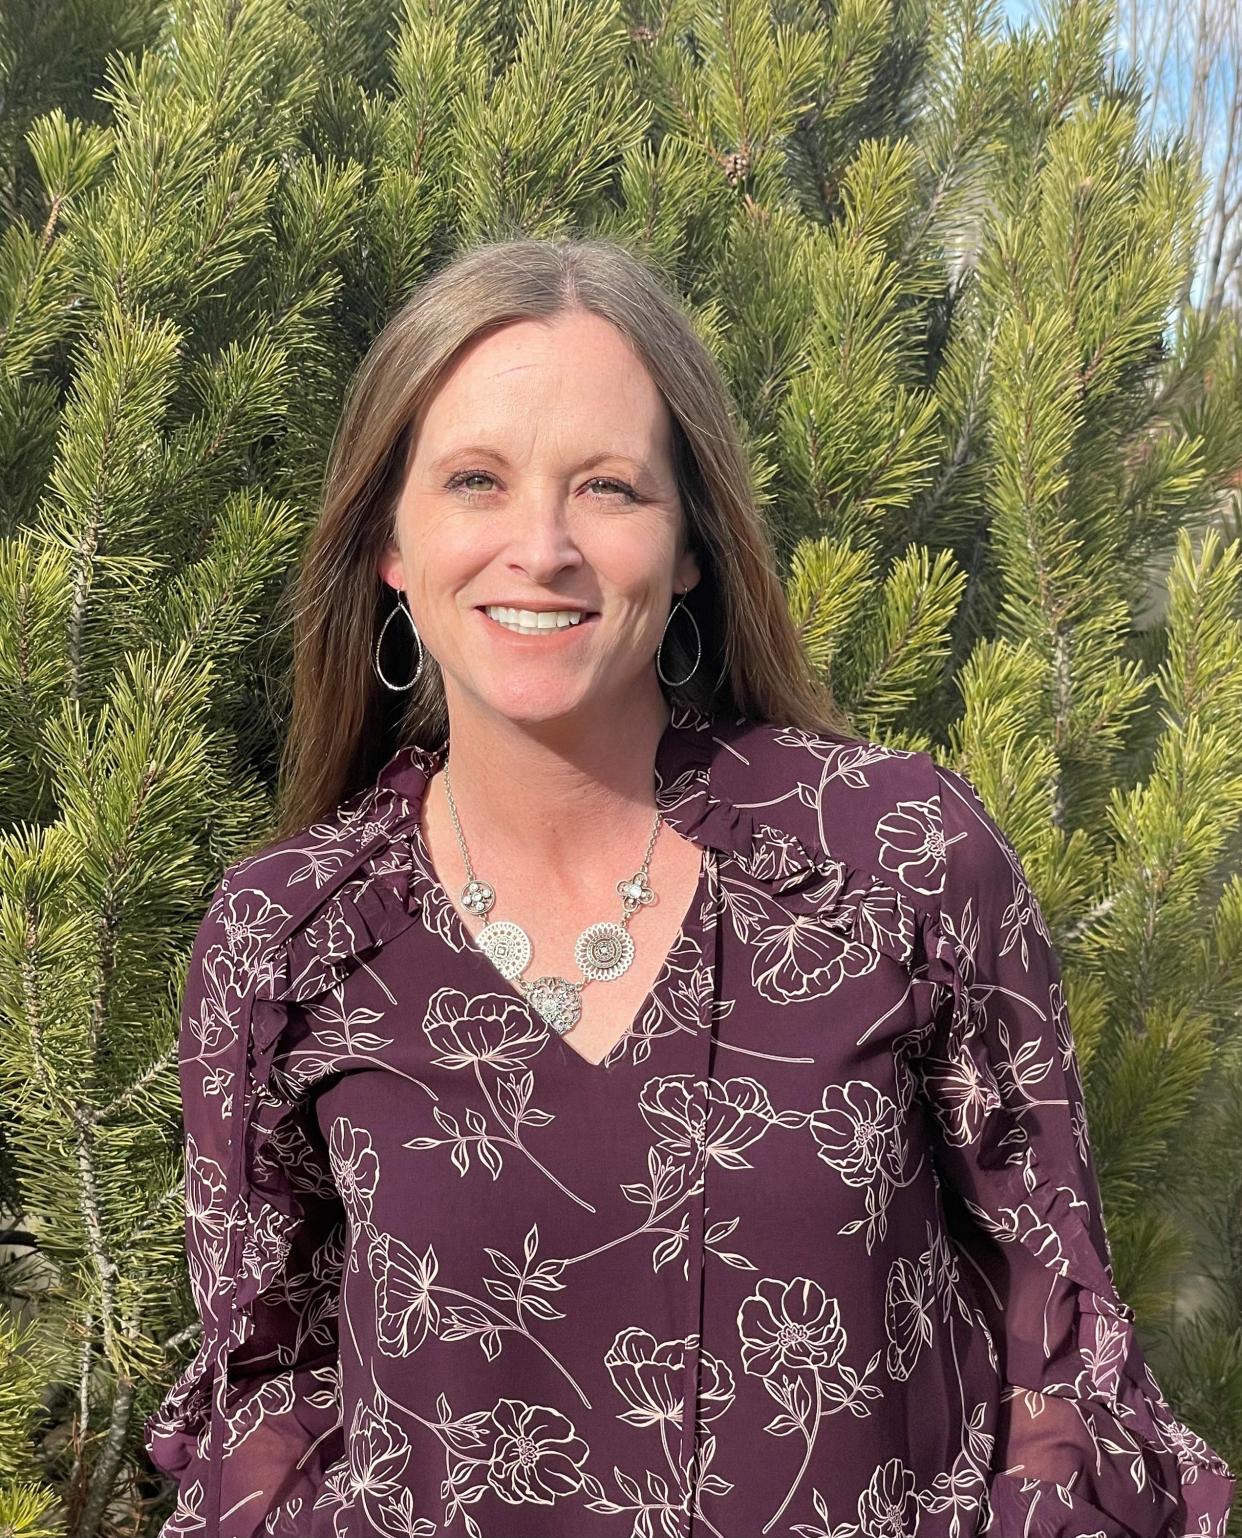 LeAnn Williams will begin her new role as Fort Collins recreation director in February 2022.